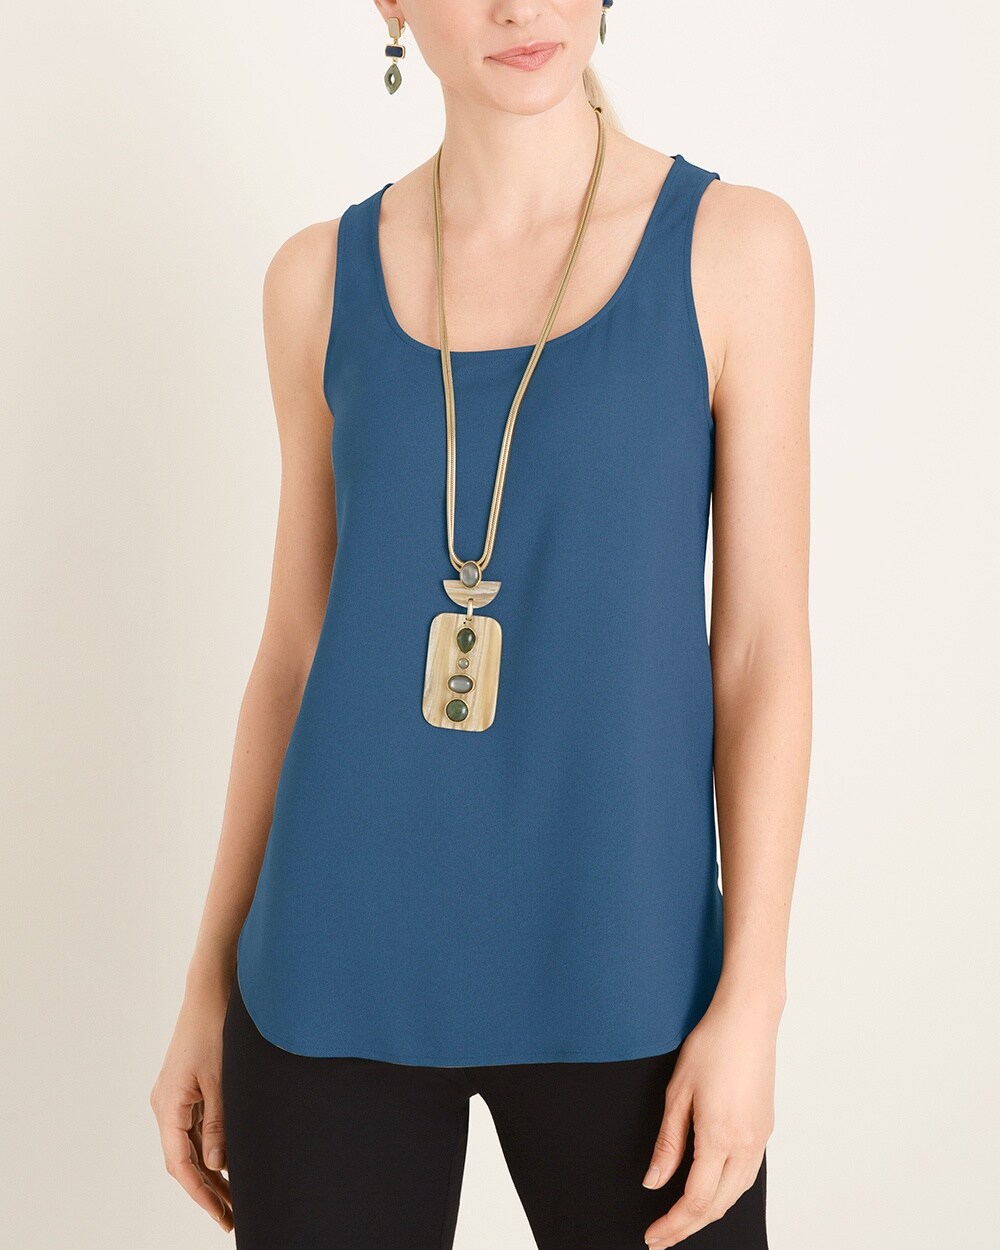 Marla Wynne for Chico's Crepe Tank